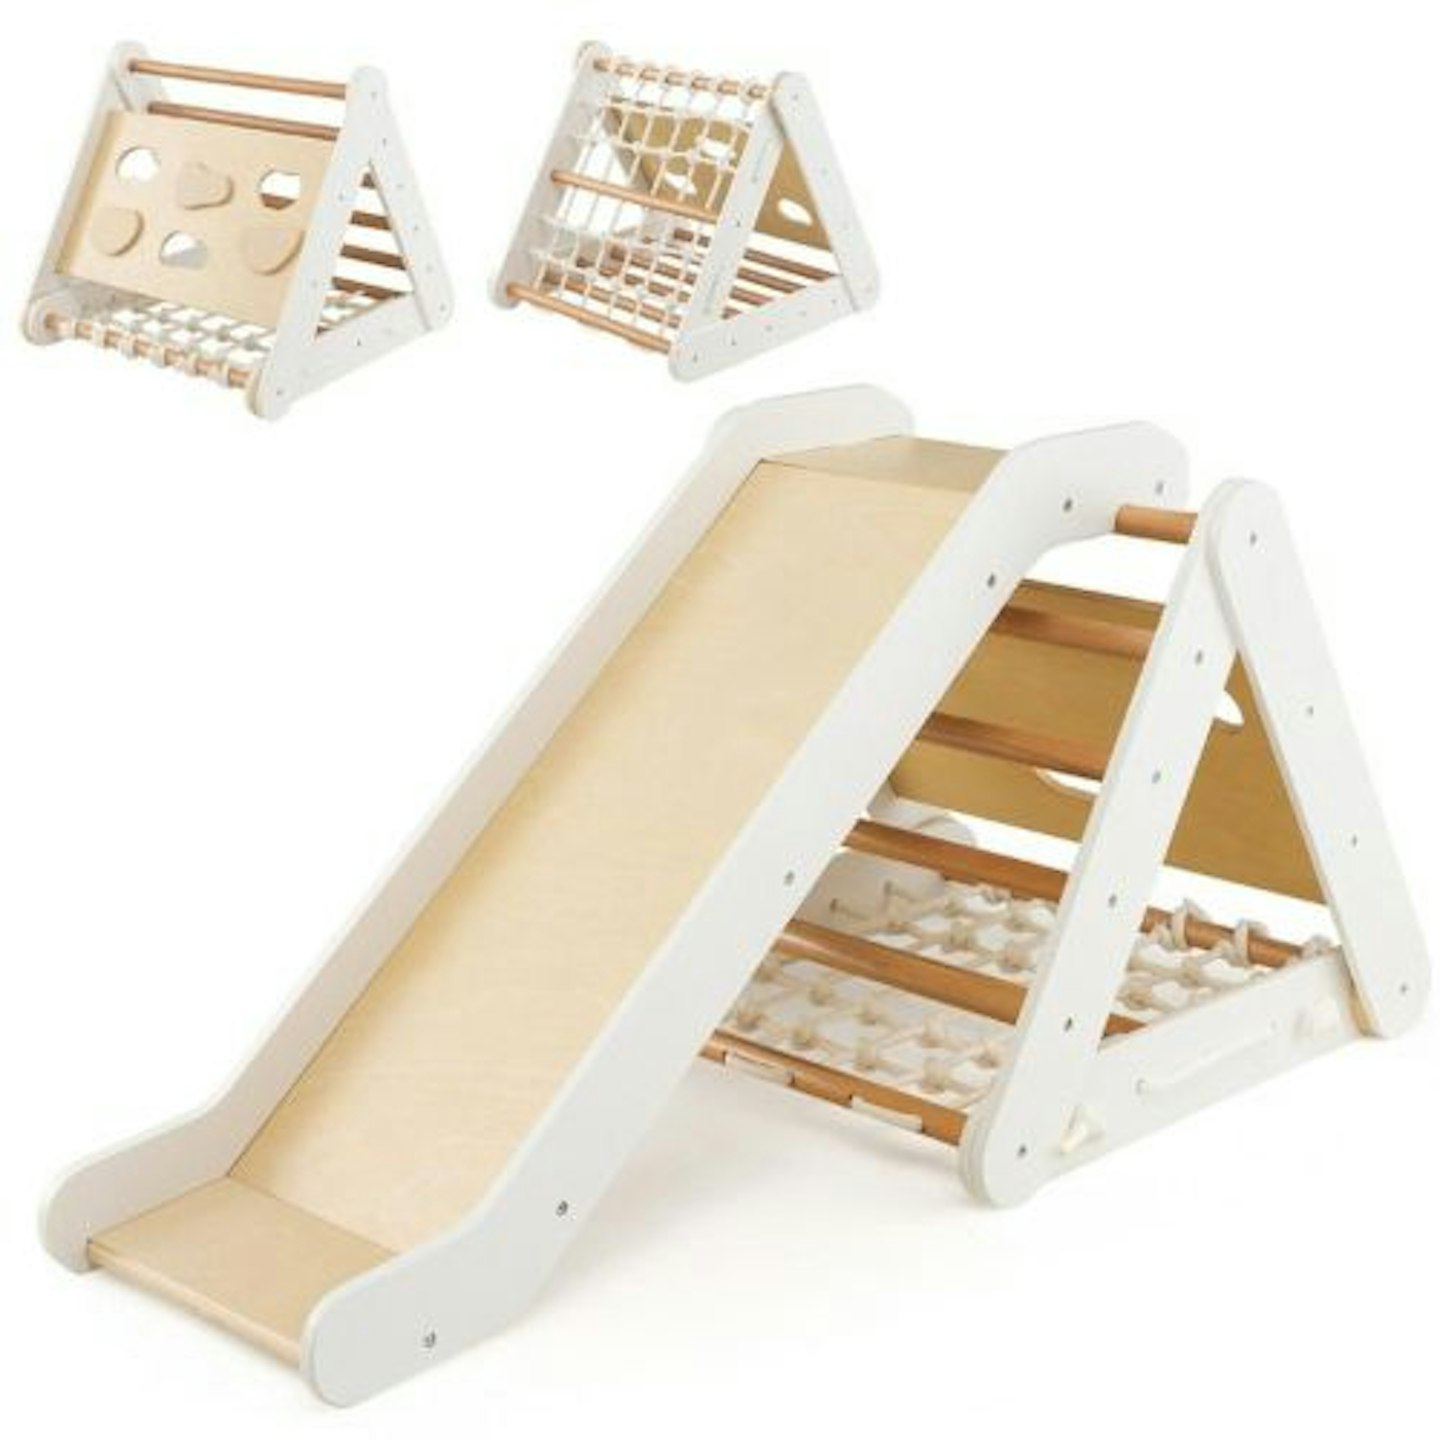 Black Friday deals 4-in-1 Eco Birch Wood Climbing Frame